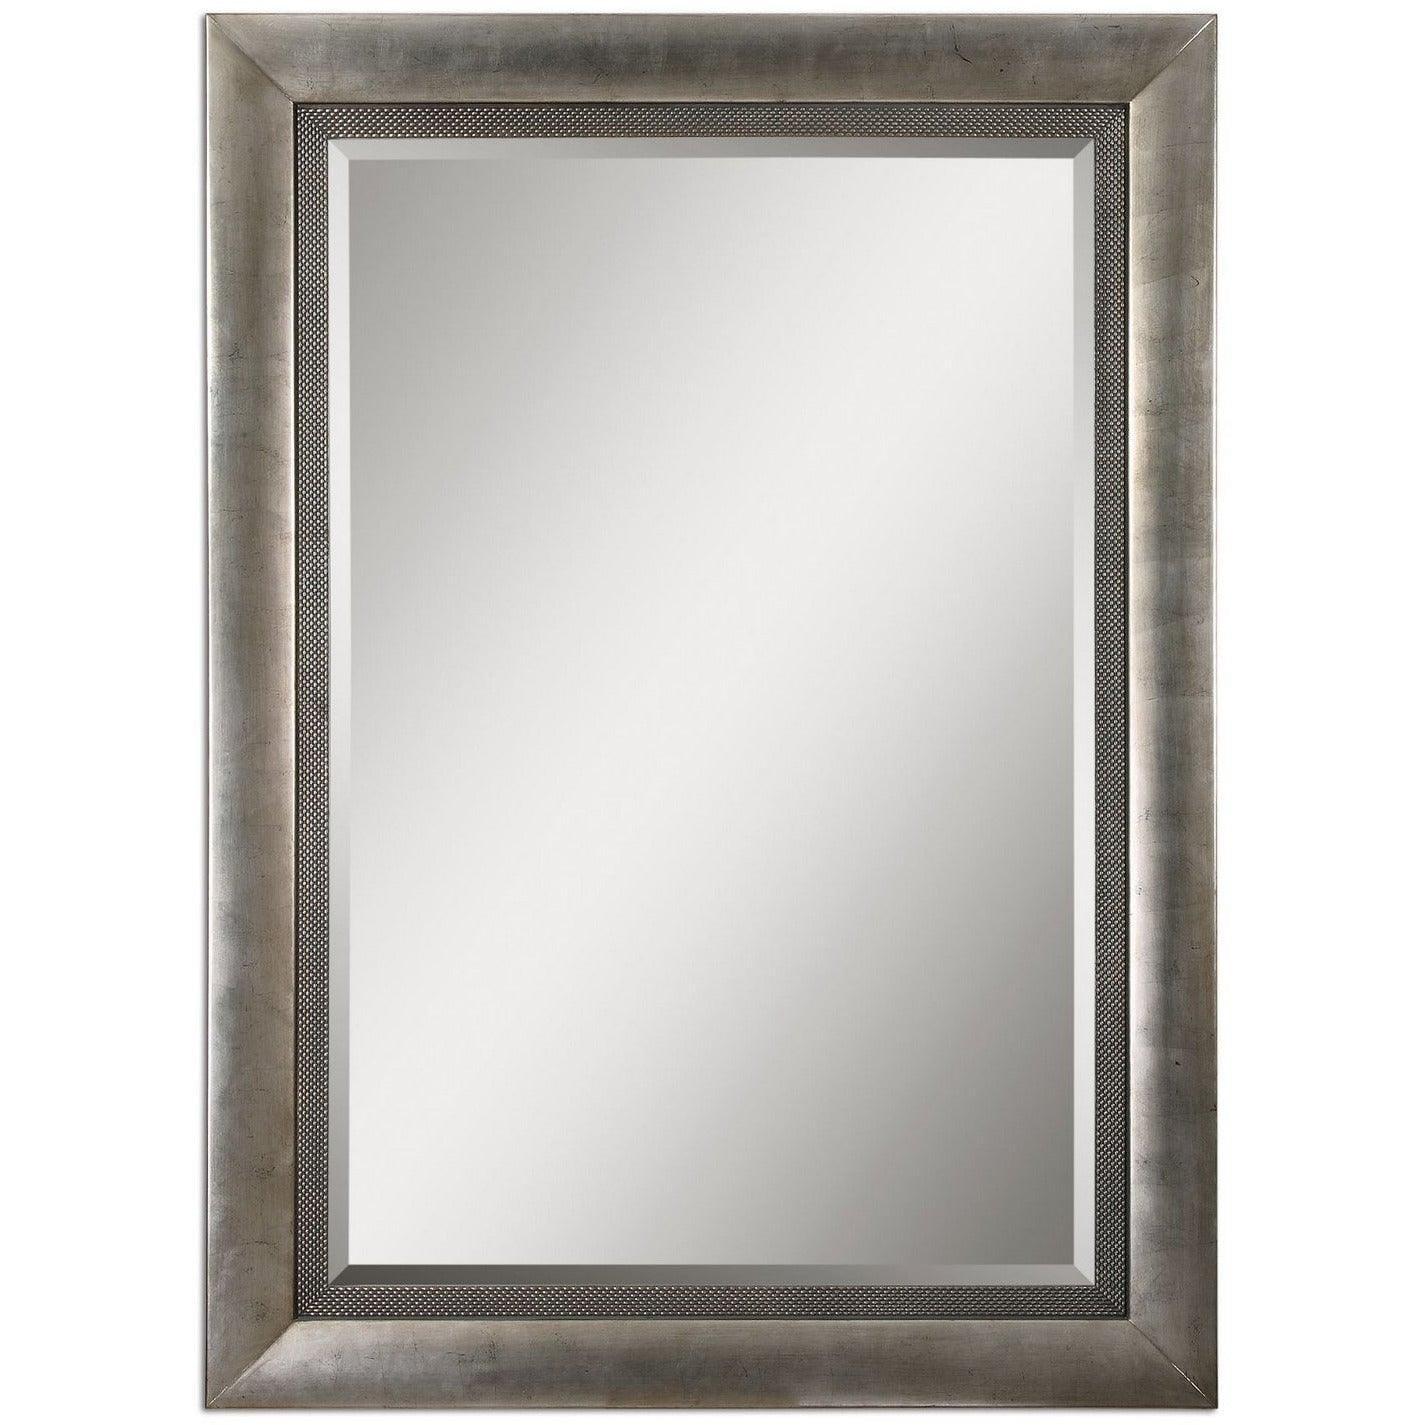 The Uttermost - Gilford Mirror - 14207 | Montreal Lighting & Hardware